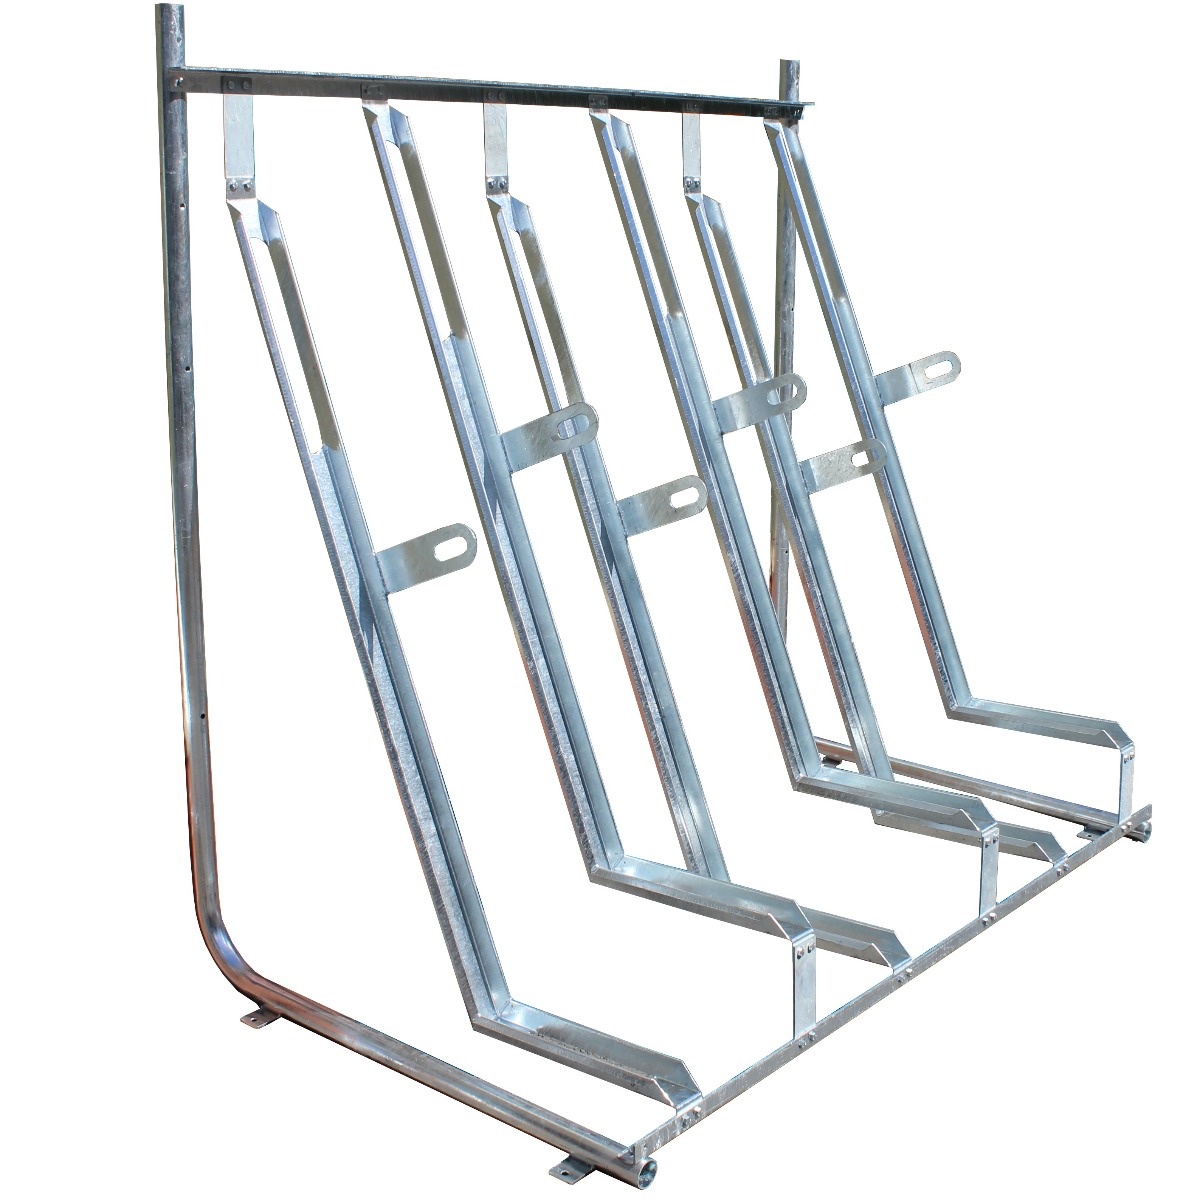 cycle stands